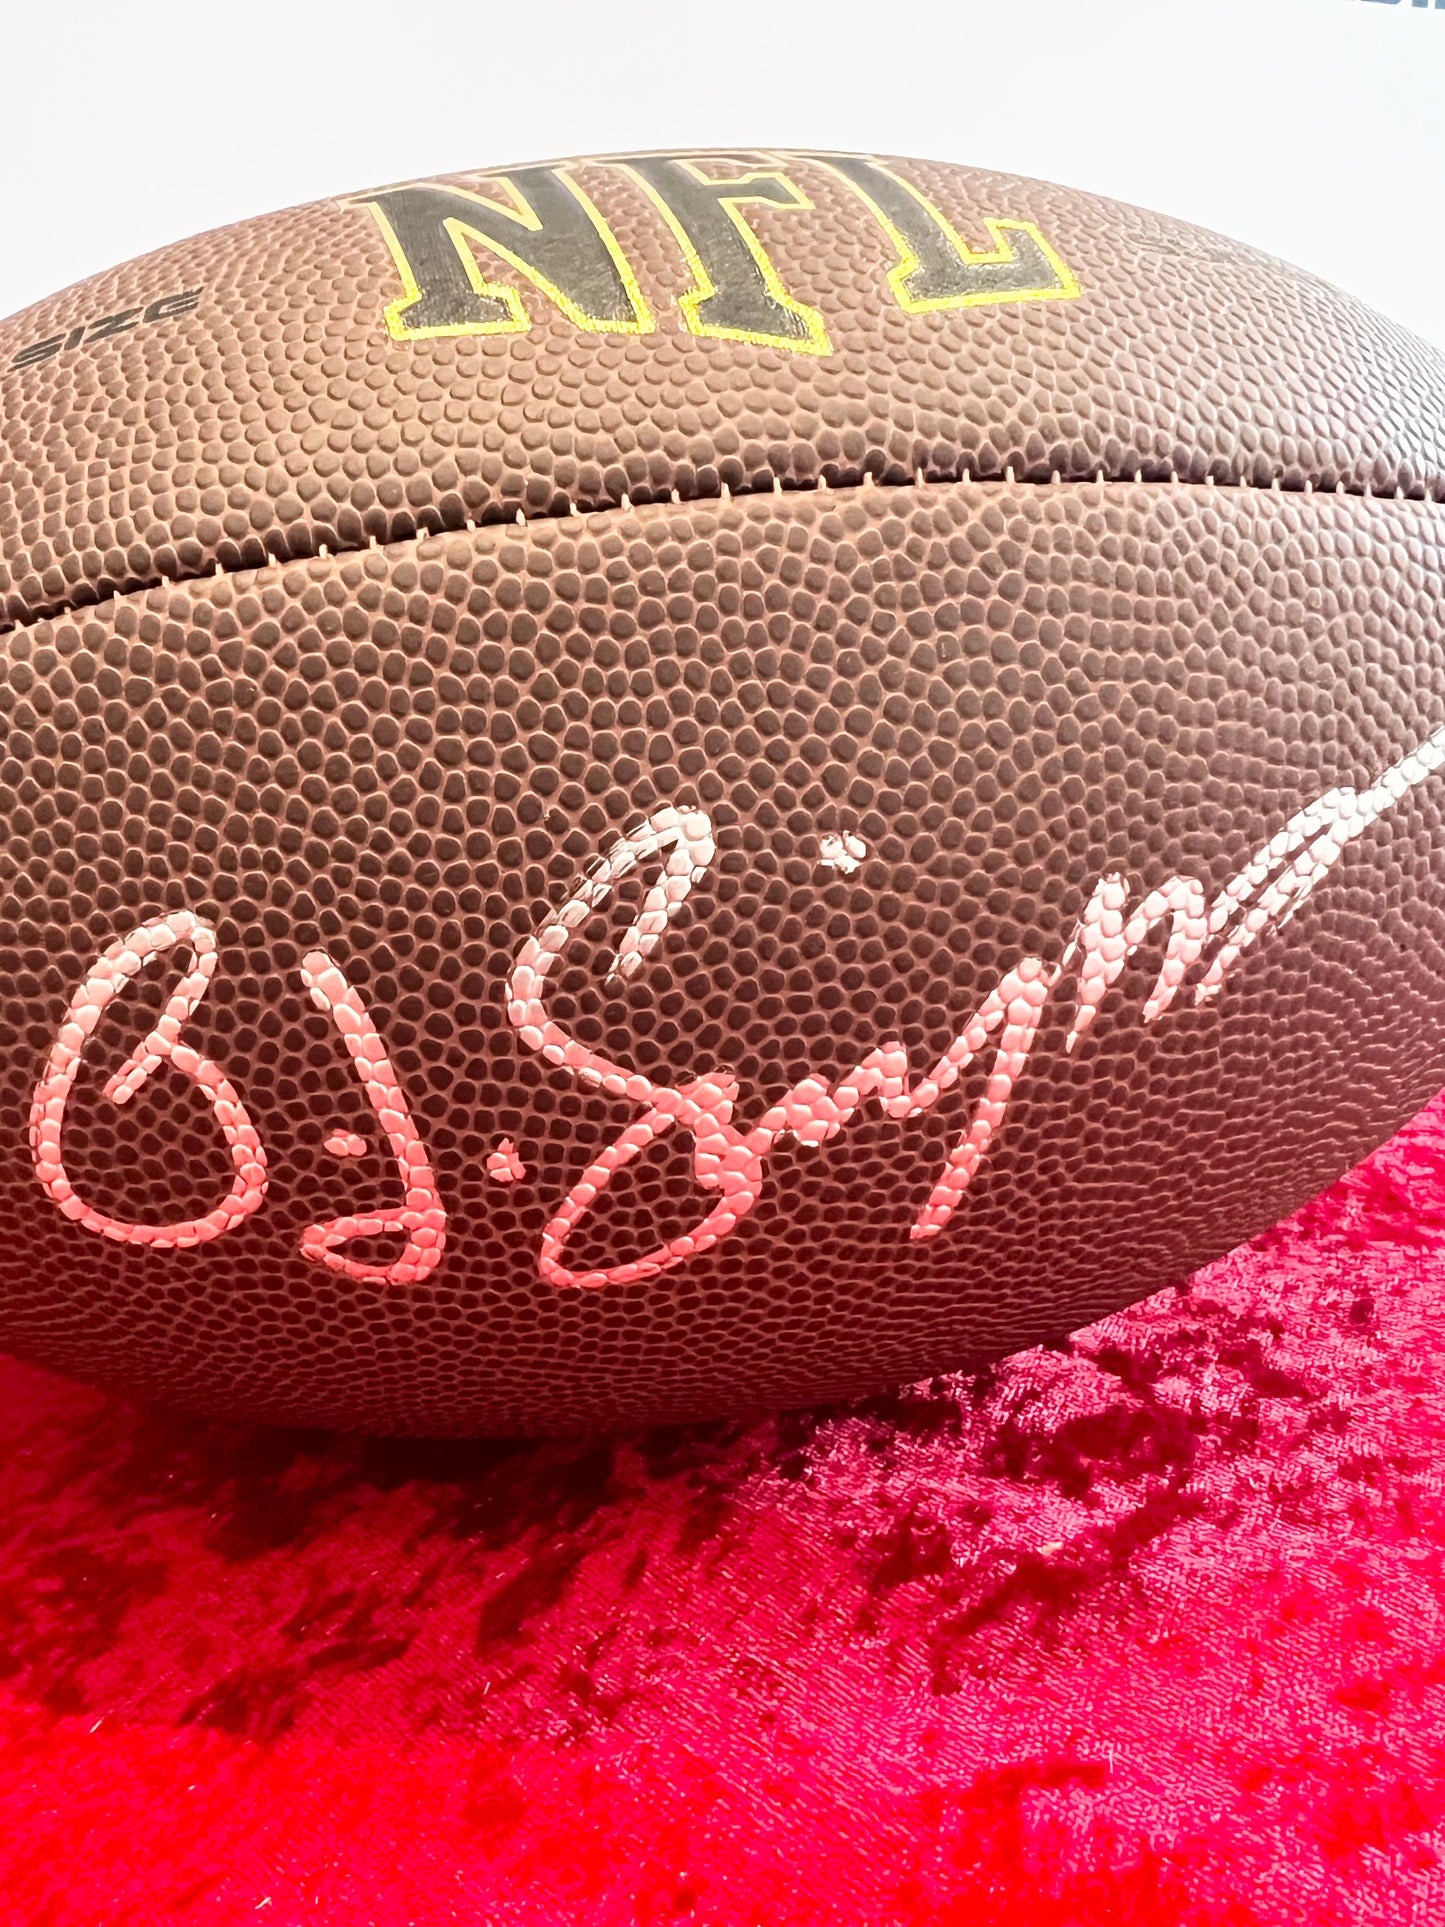 OJ Simpson Signed Autographed Wilson NFL Football with JSA Authentication